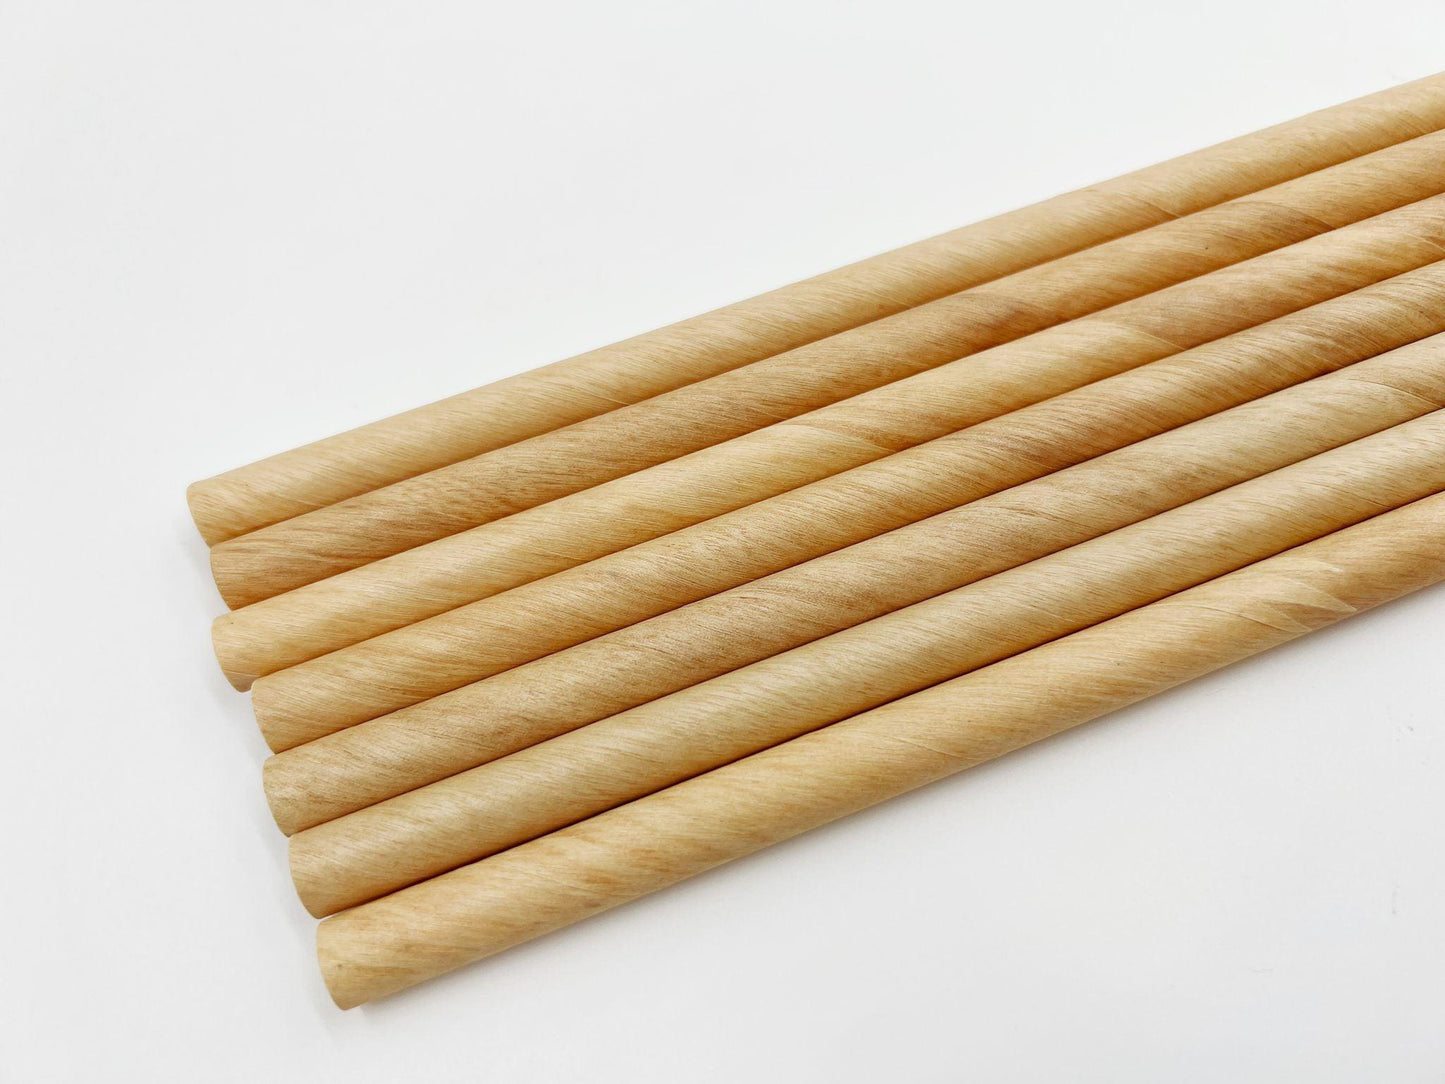 Wooden Boba Straws (pointed tip) Natural Drinking - Single use, Disposable, Biodegradable - 1700/case